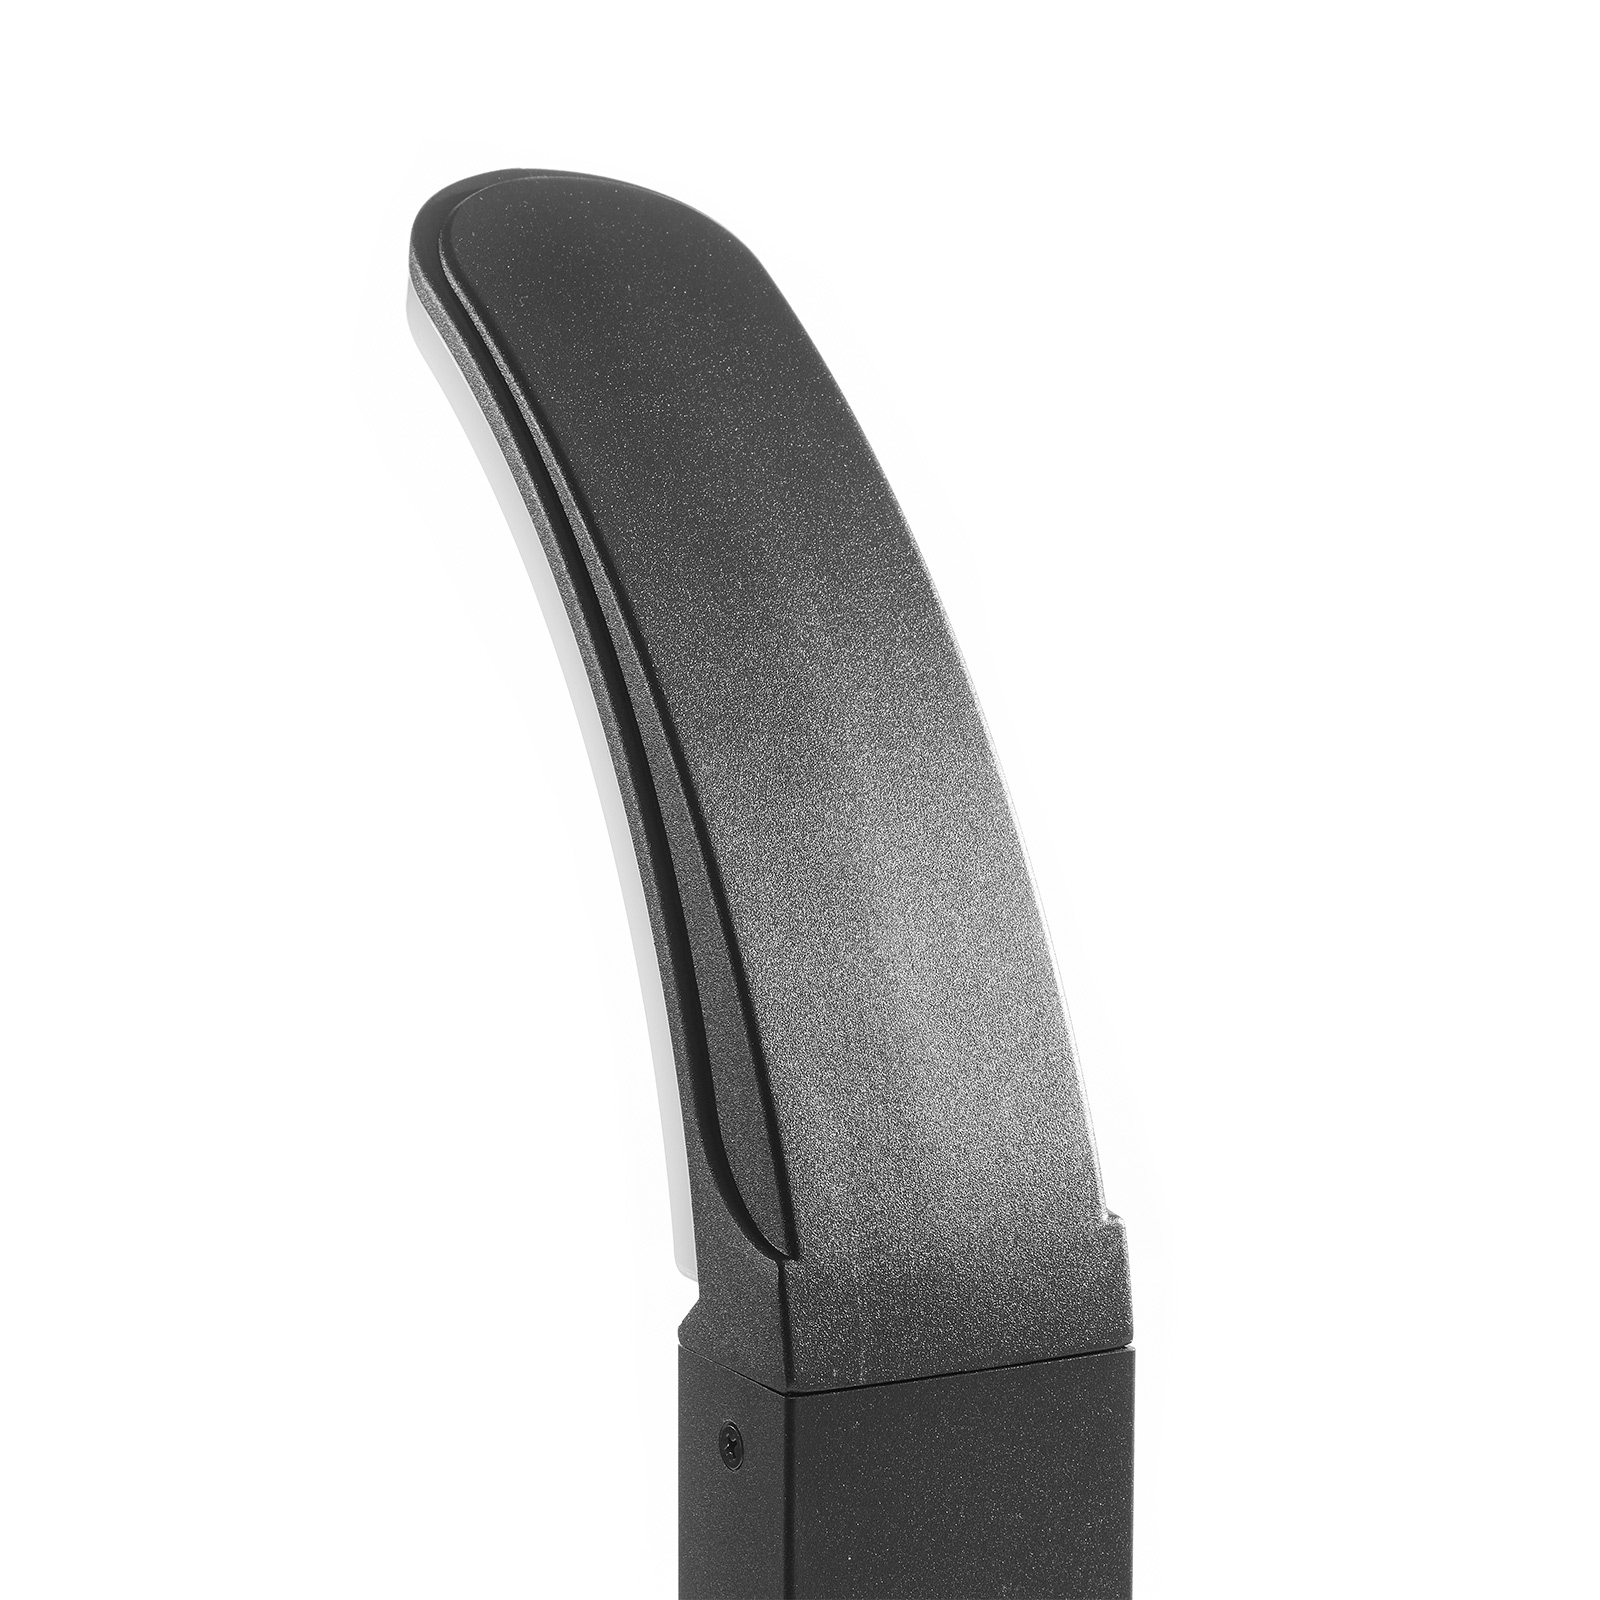 Fiumicino LED path lamp in a curved shape